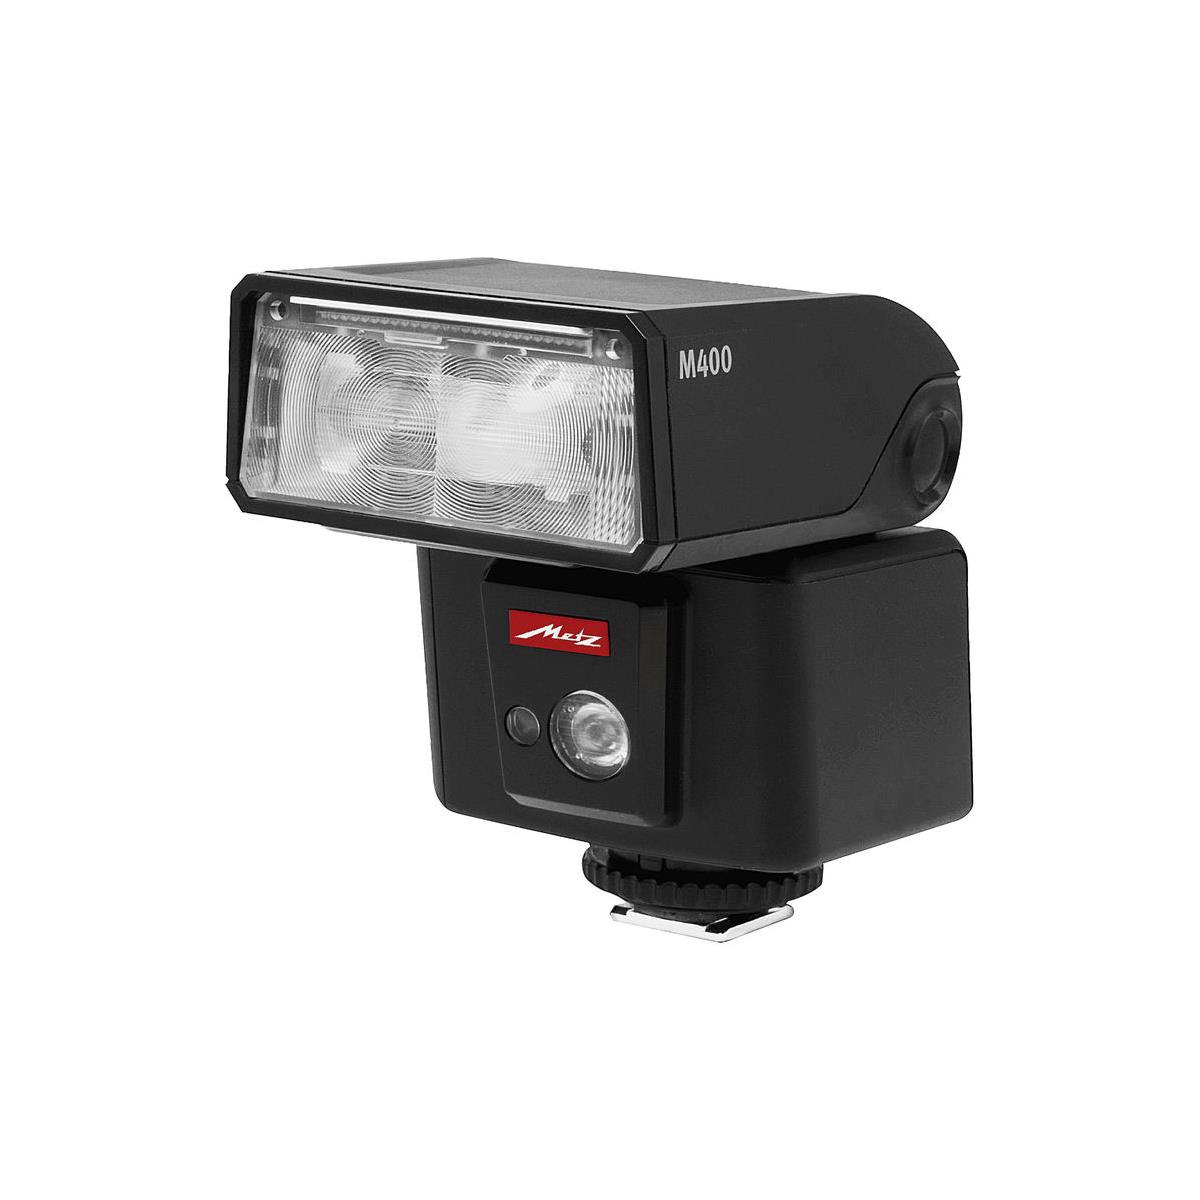 Image of Metz mecablitz M400 Flash for Canon Cameras